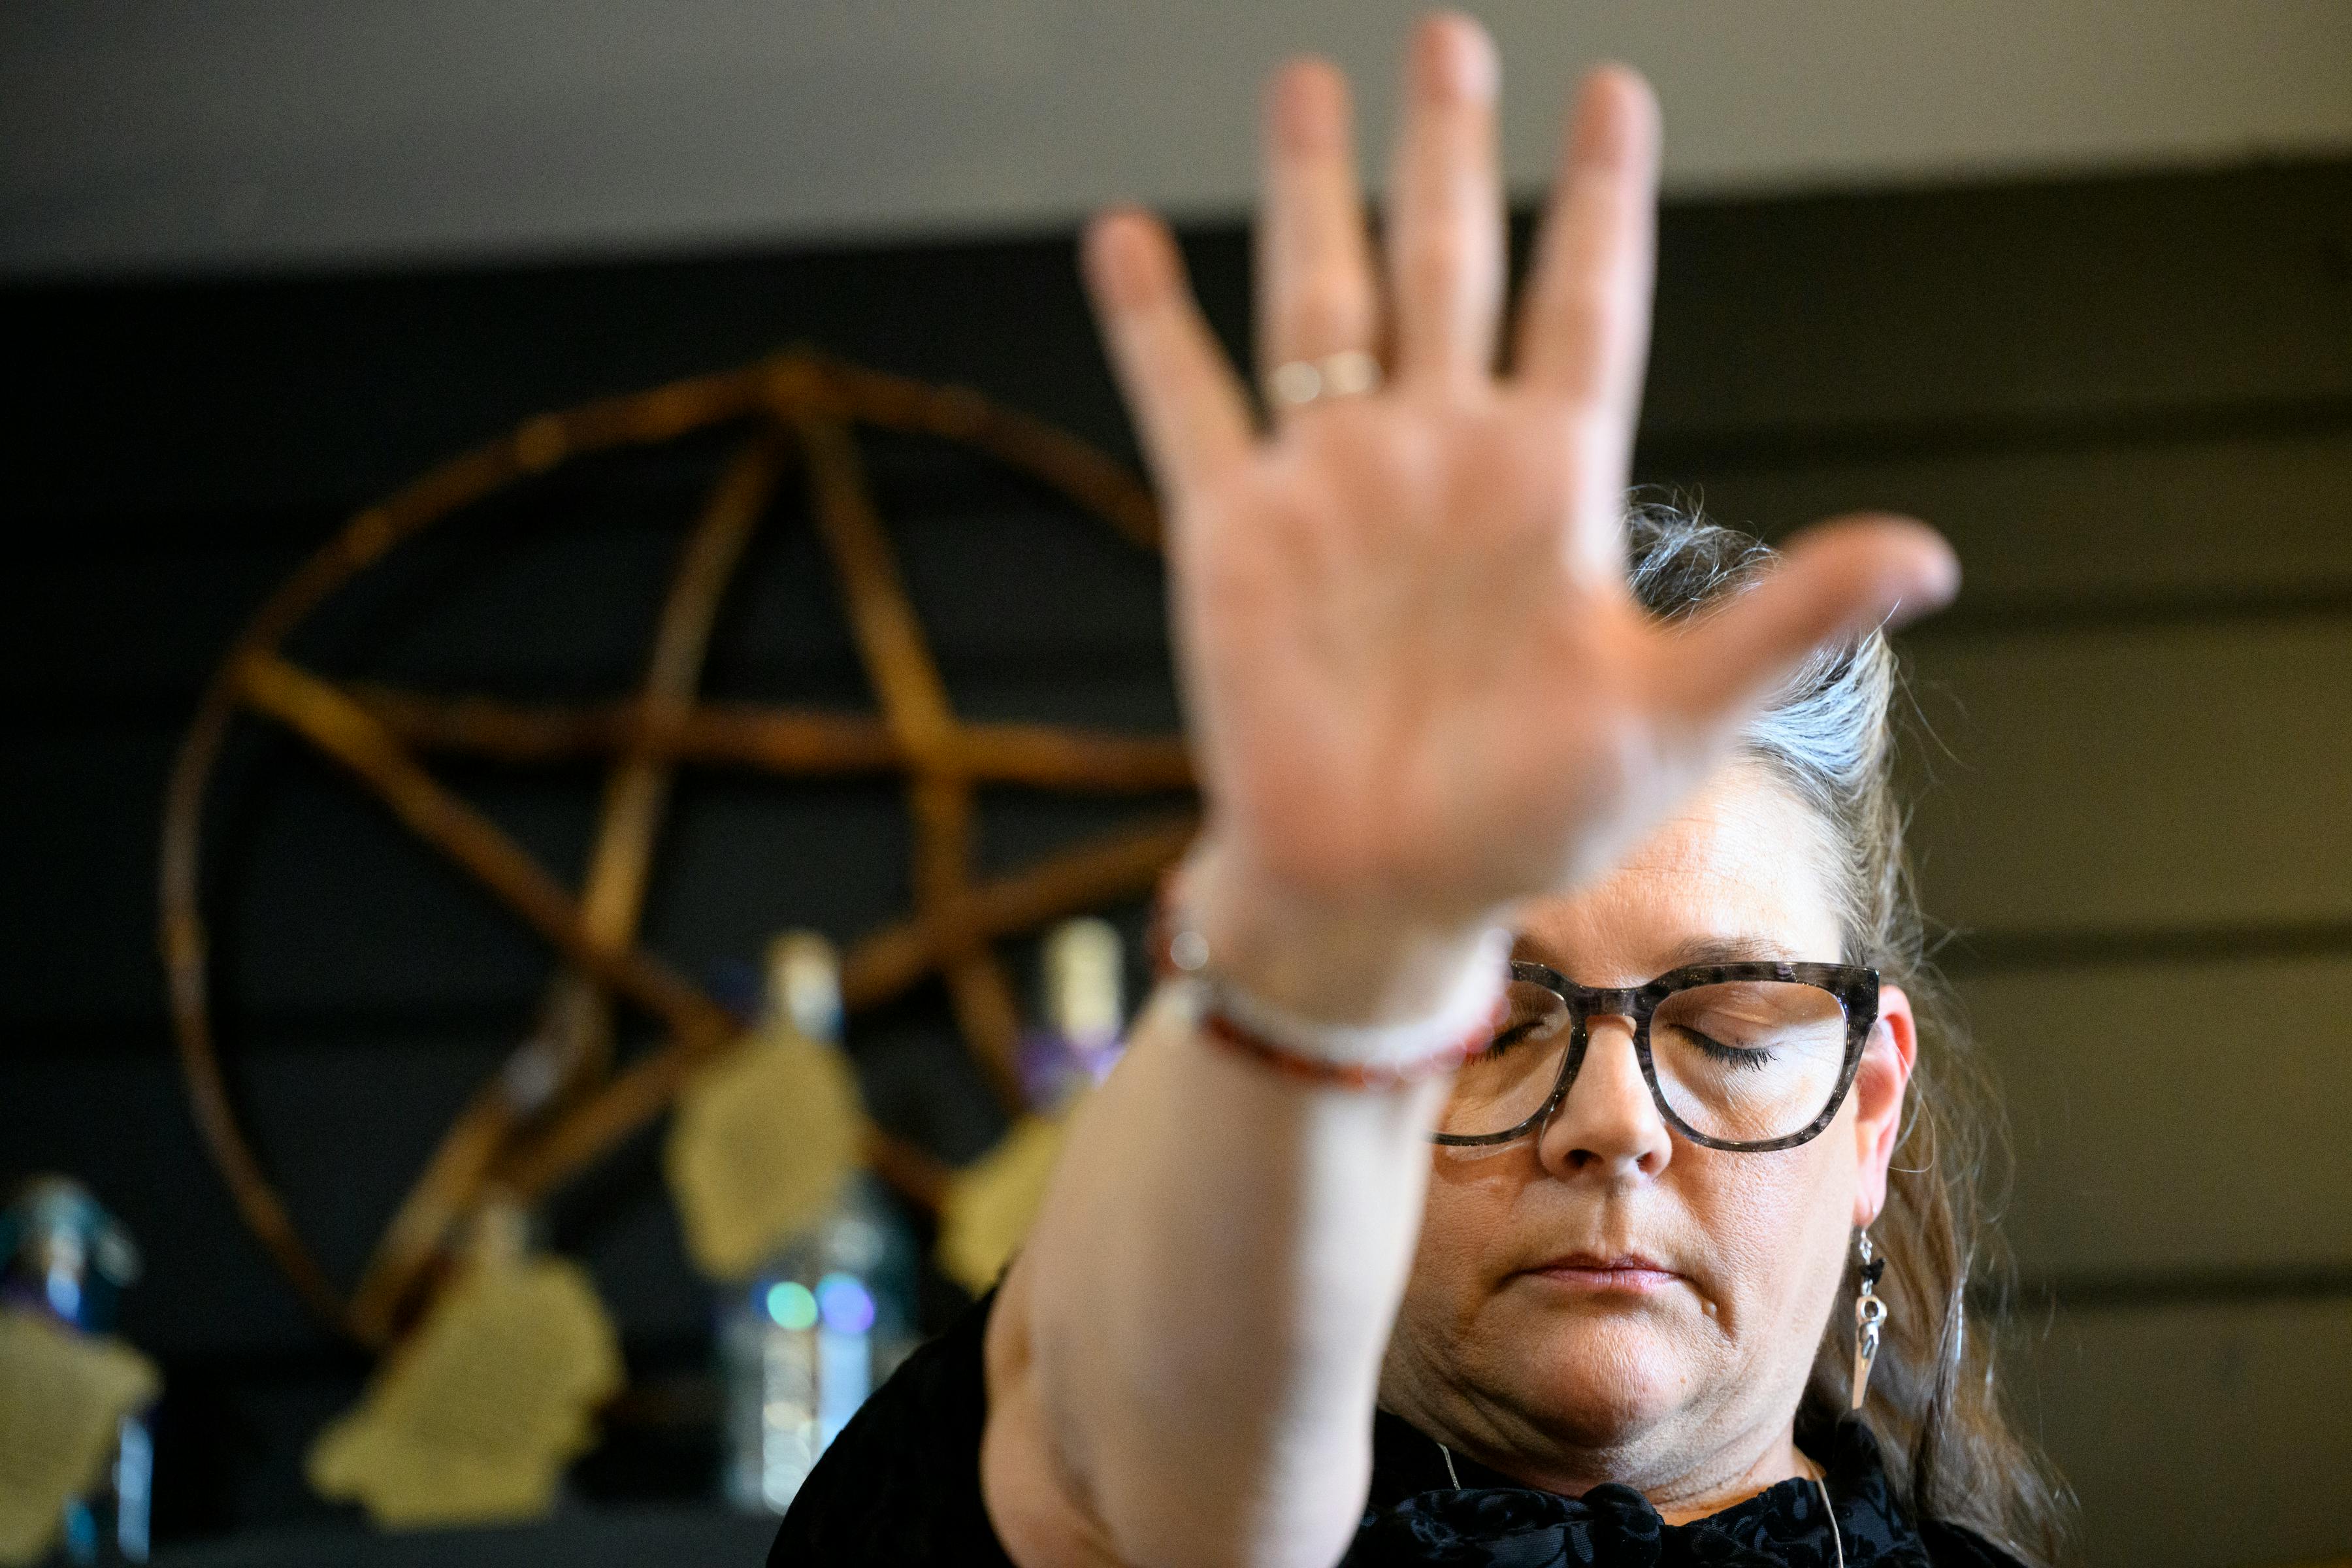 Interest in witchcraft is growing across the country